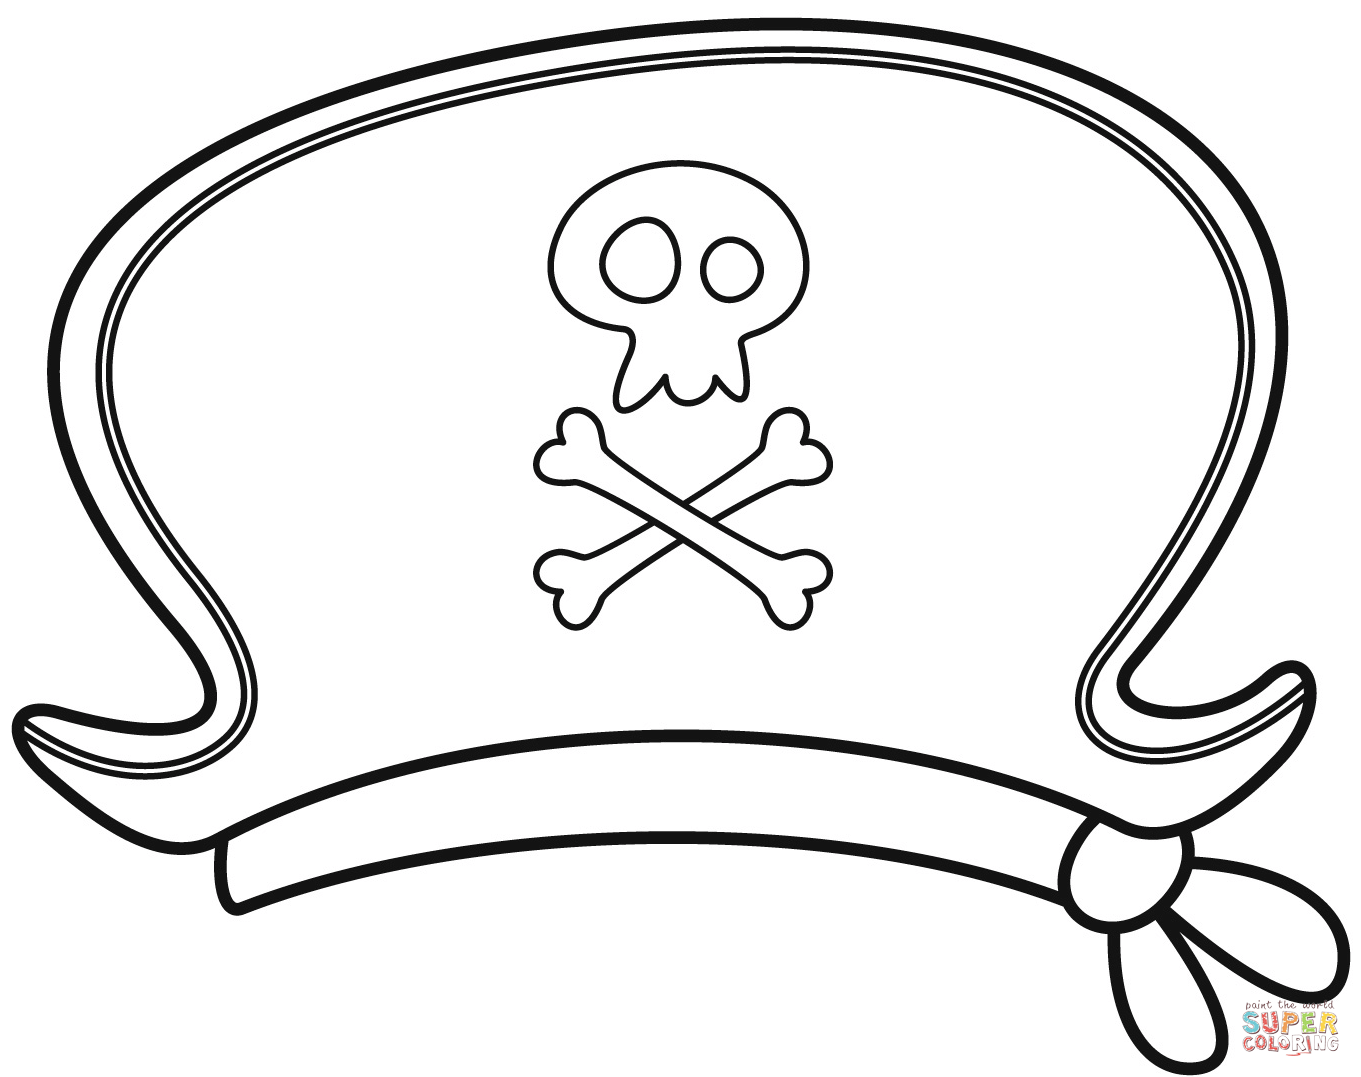 Pirate hat coloring page free printable coloring pages